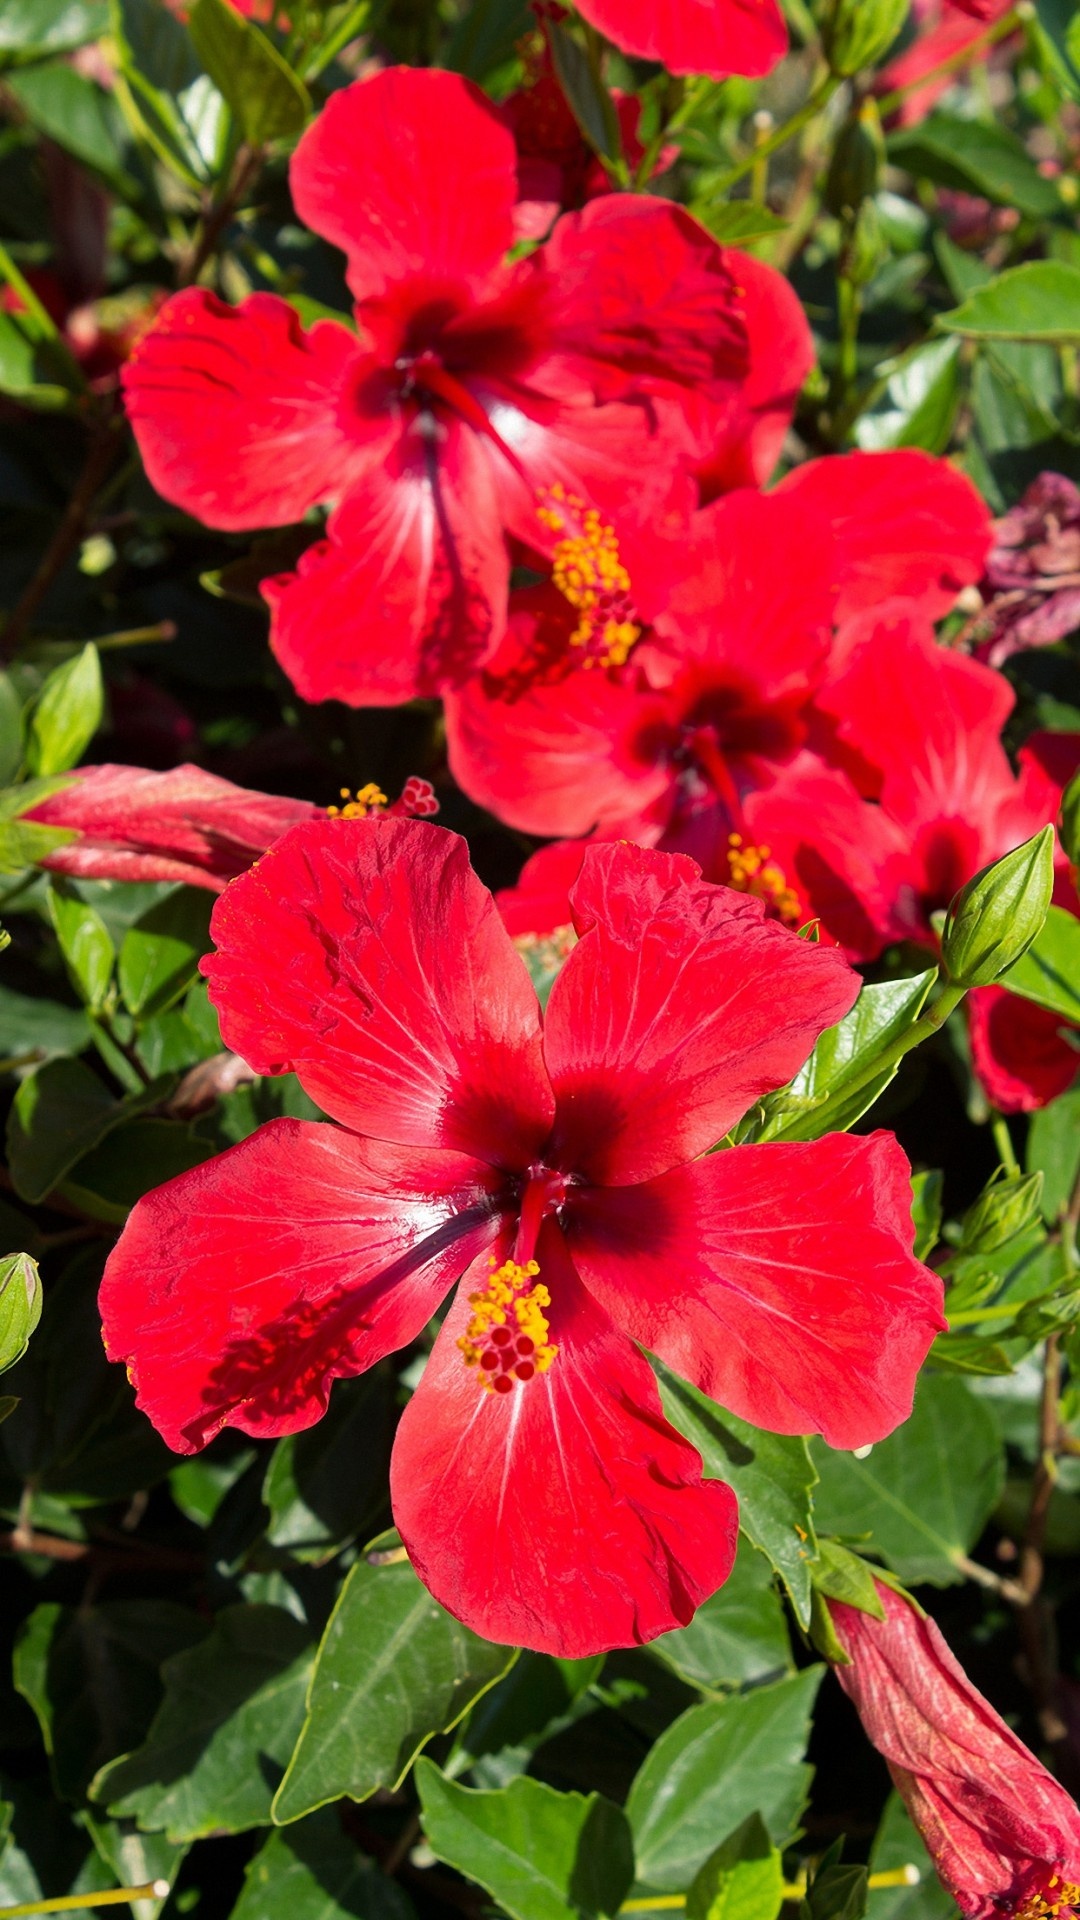 Hibiscus wallpapers, Desktop background, Floral delight, Nature's beauty, 1080x1920 Full HD Handy